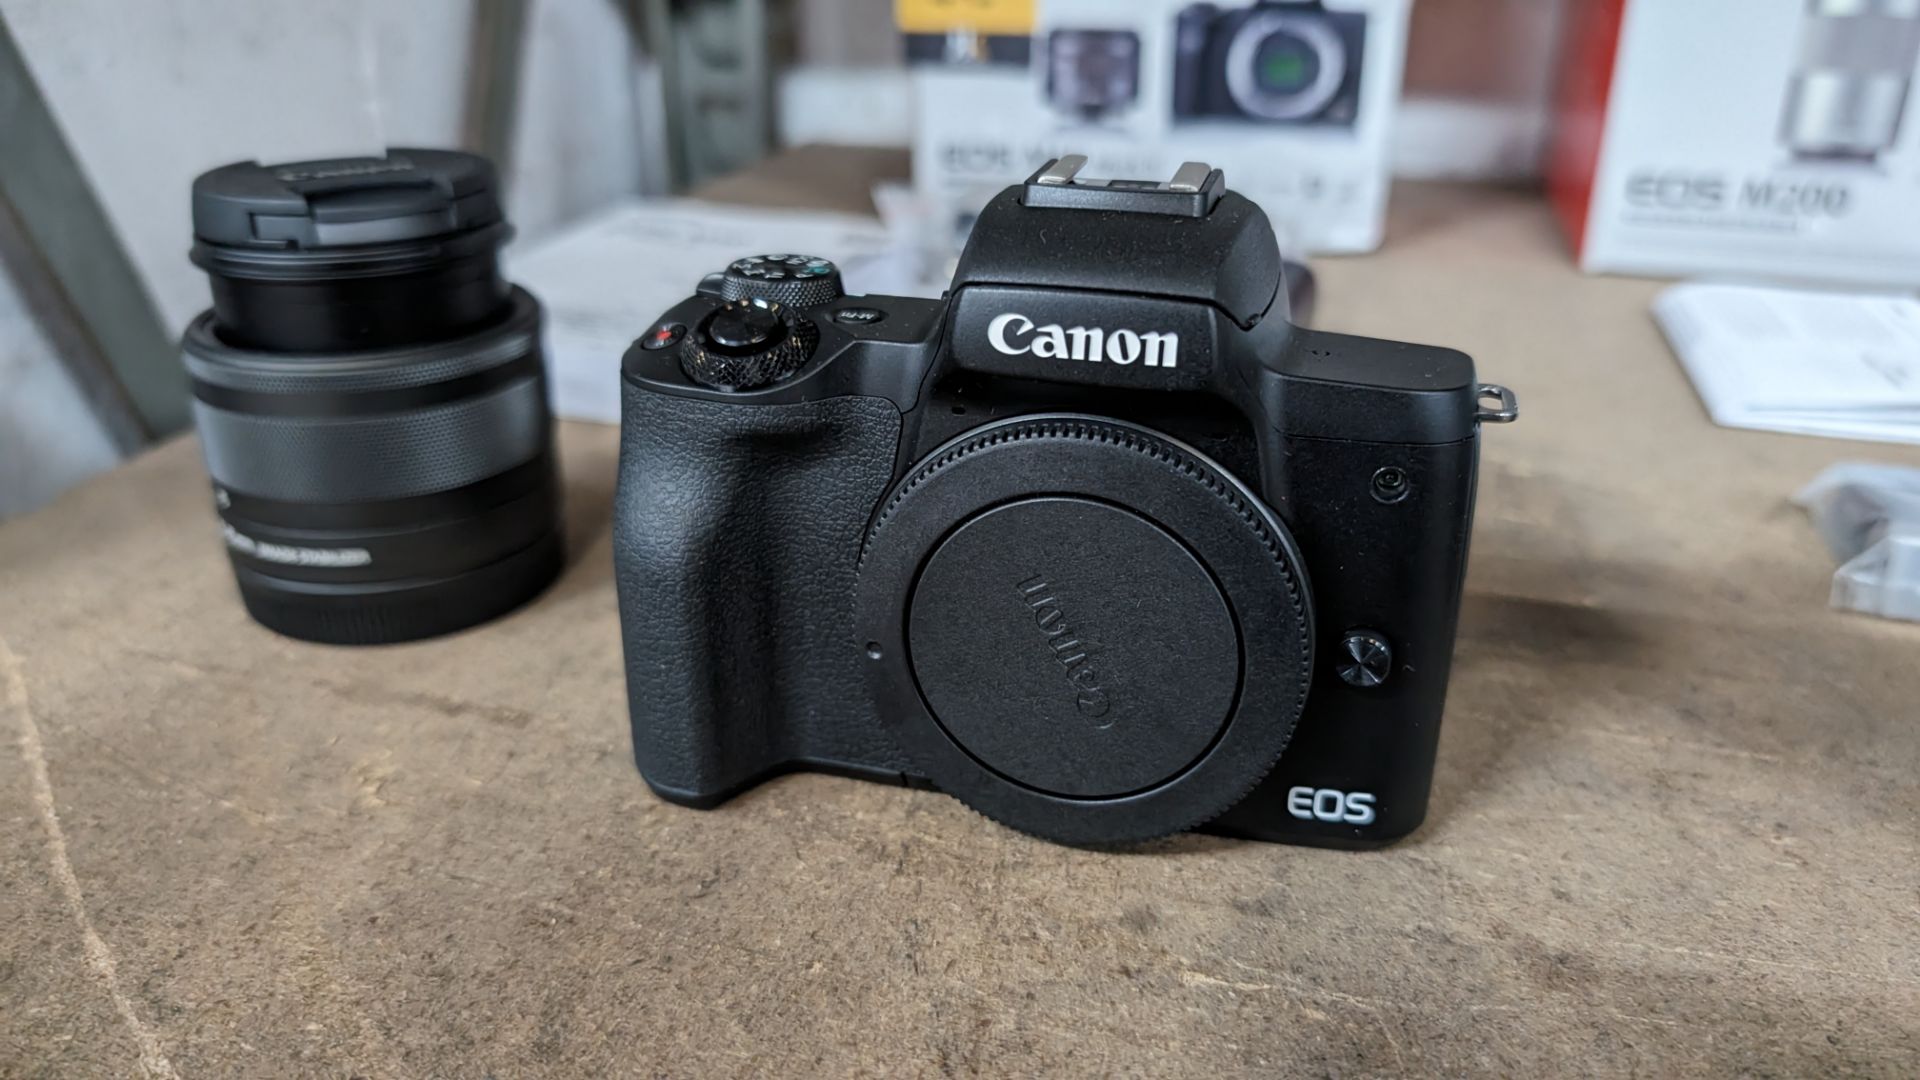 Canon EOS M50 MARK II camera, including 15-45mm image stabilizer lens, plus battery and charger - Image 3 of 14